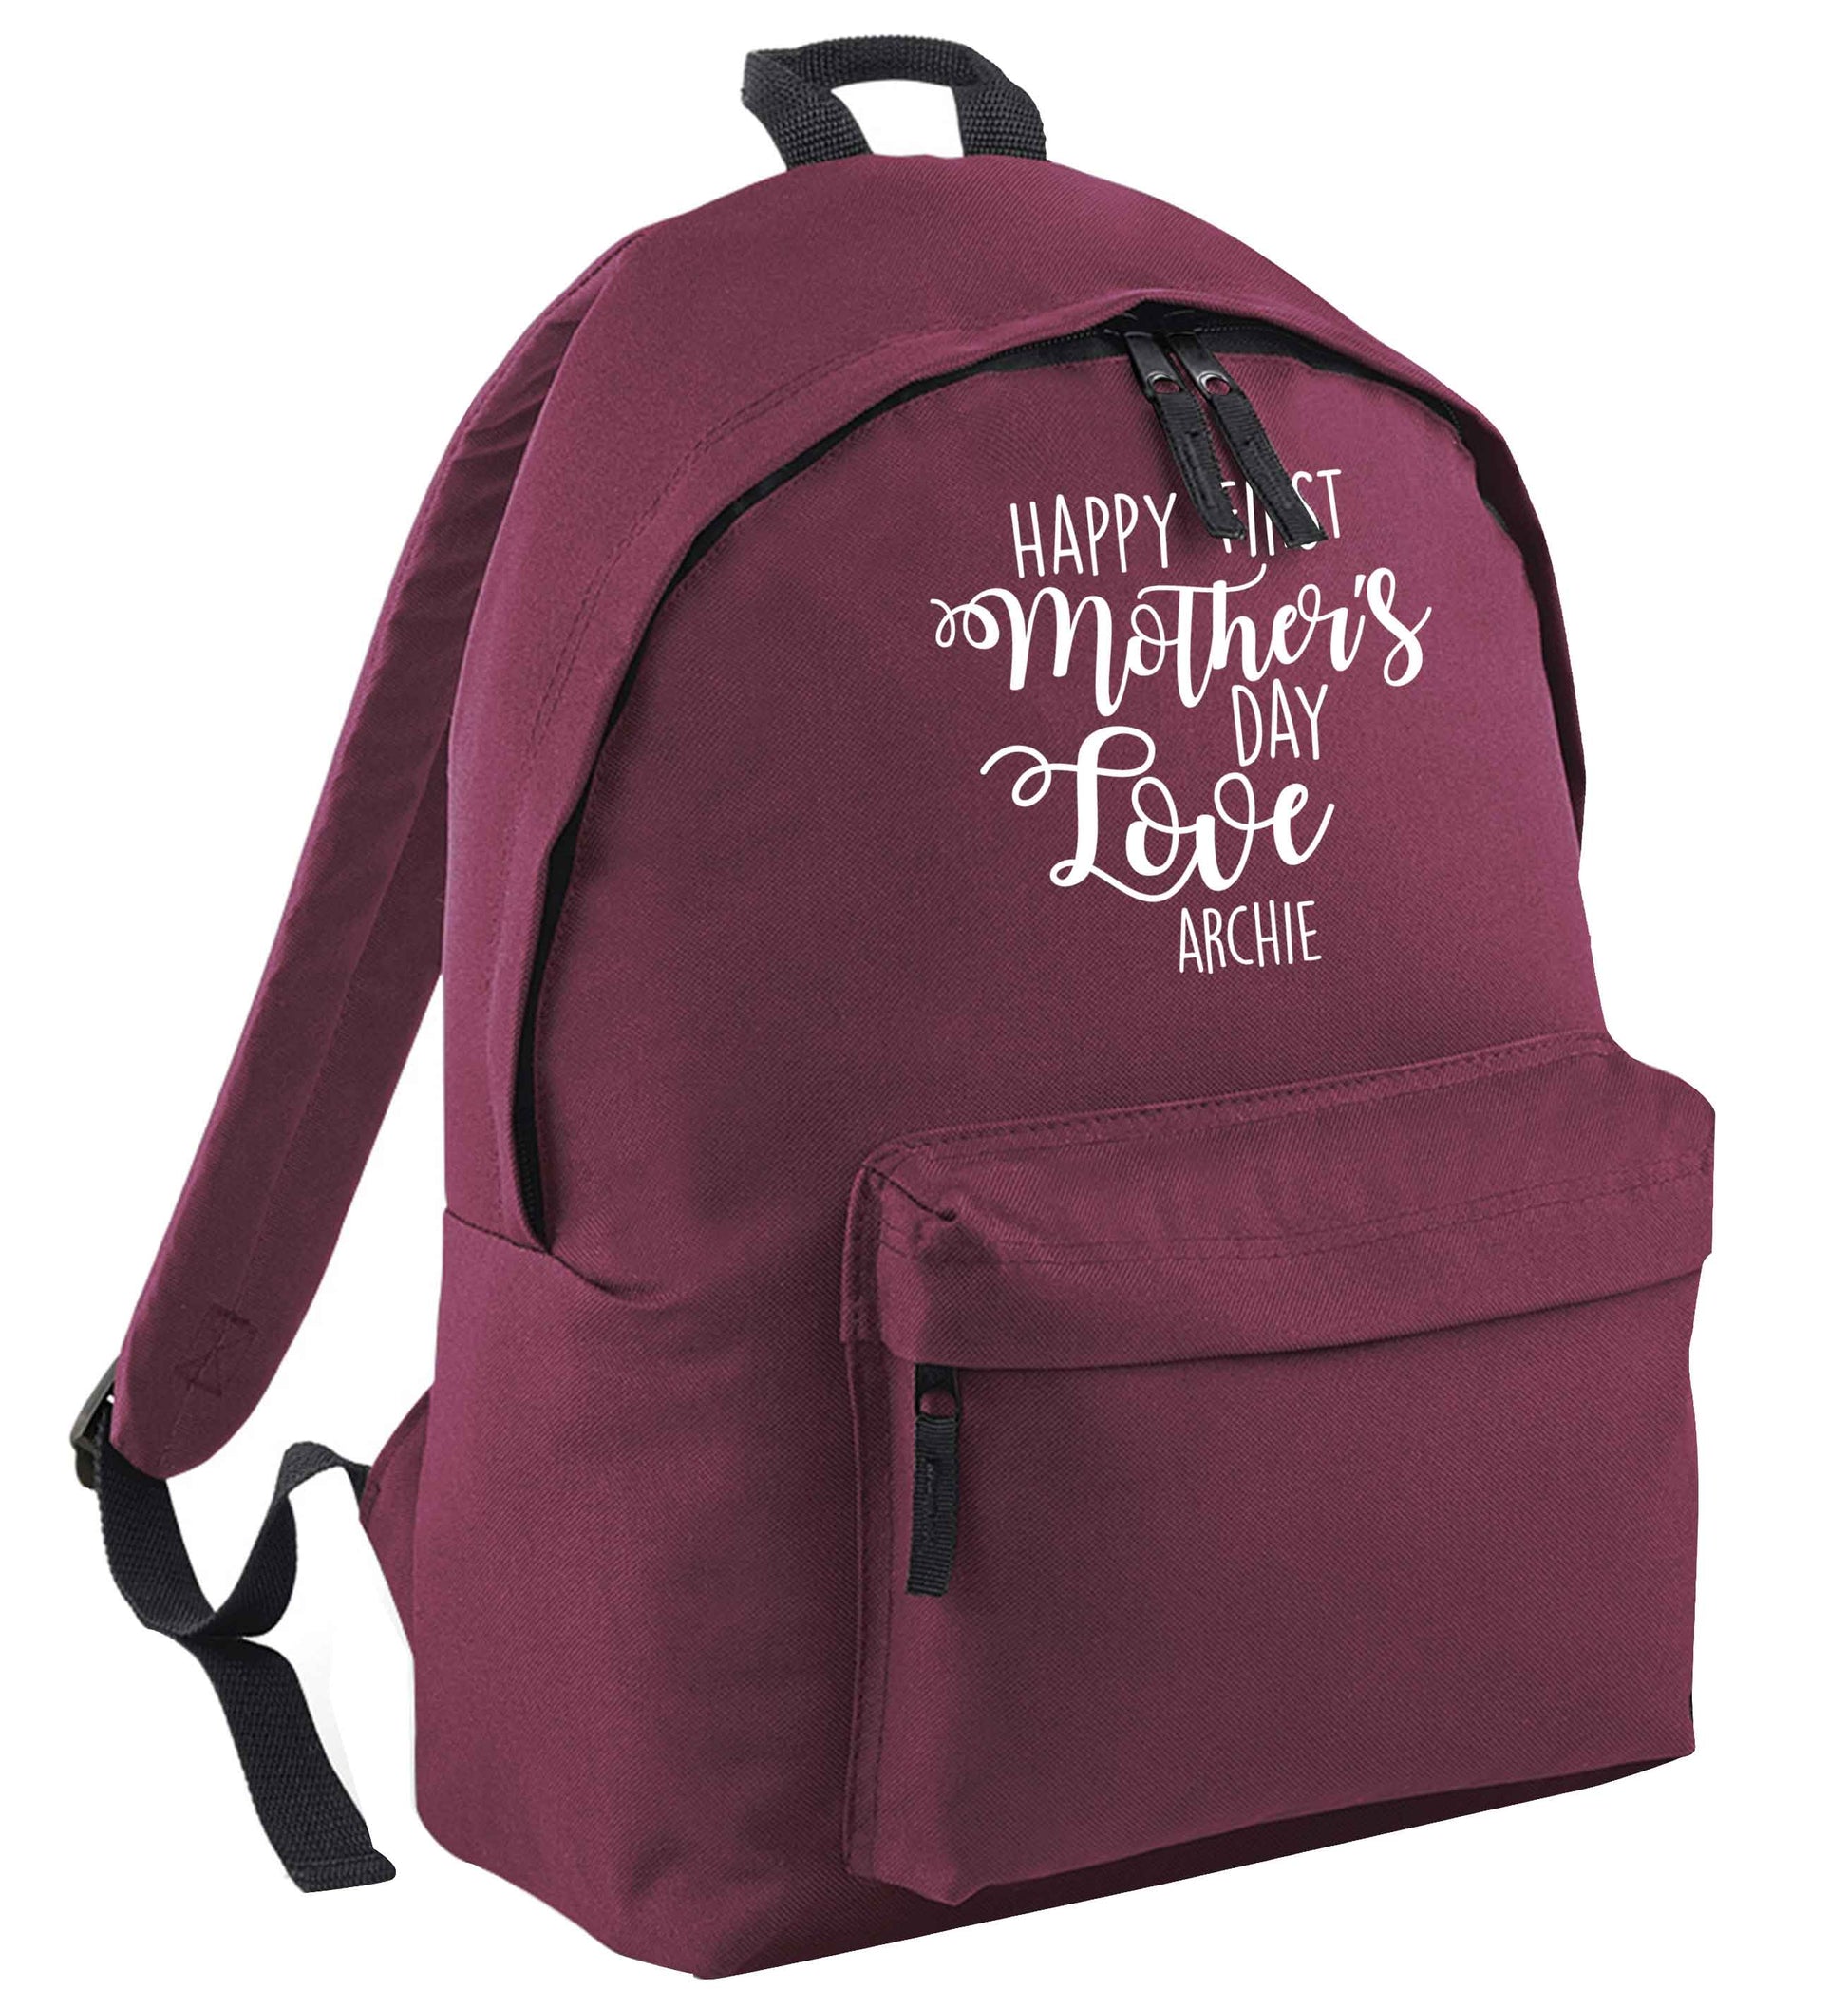 Personalised happy first mother's day love black childrens backpack